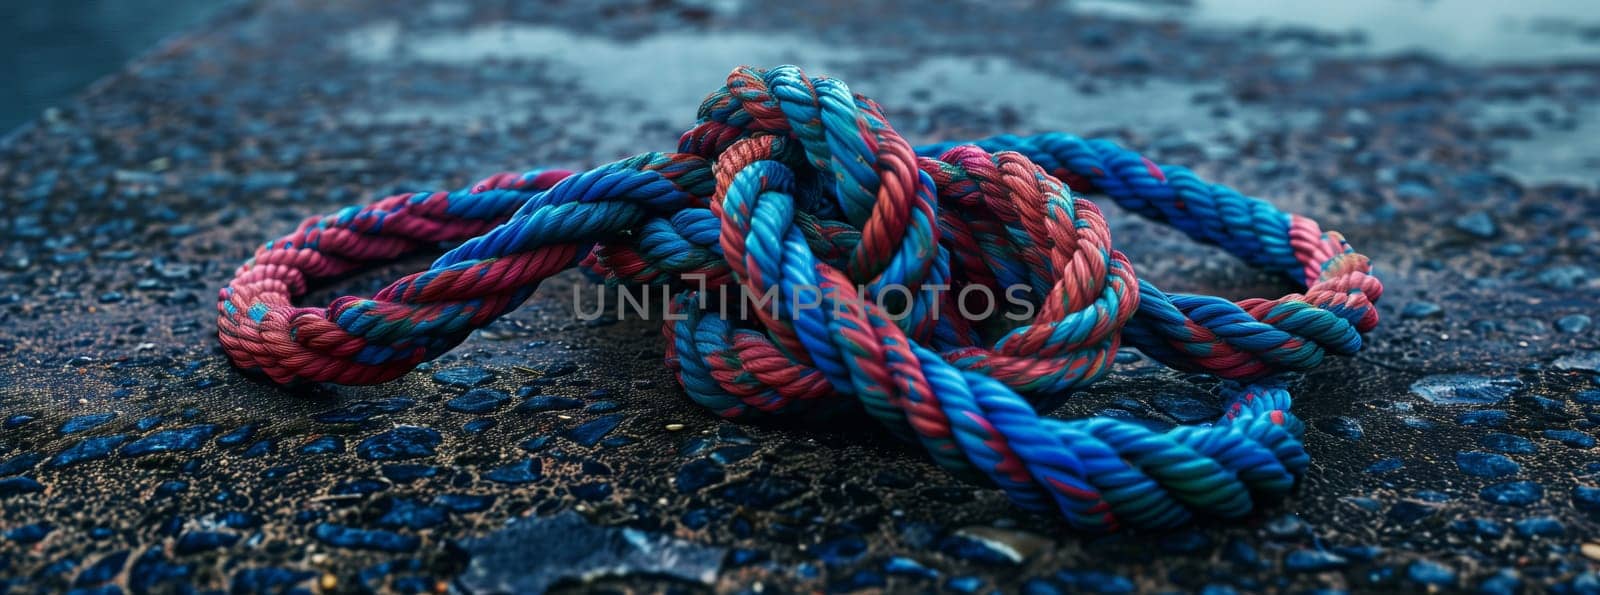 Artistic pattern of an electric blue and magenta rope on the ground by richwolf